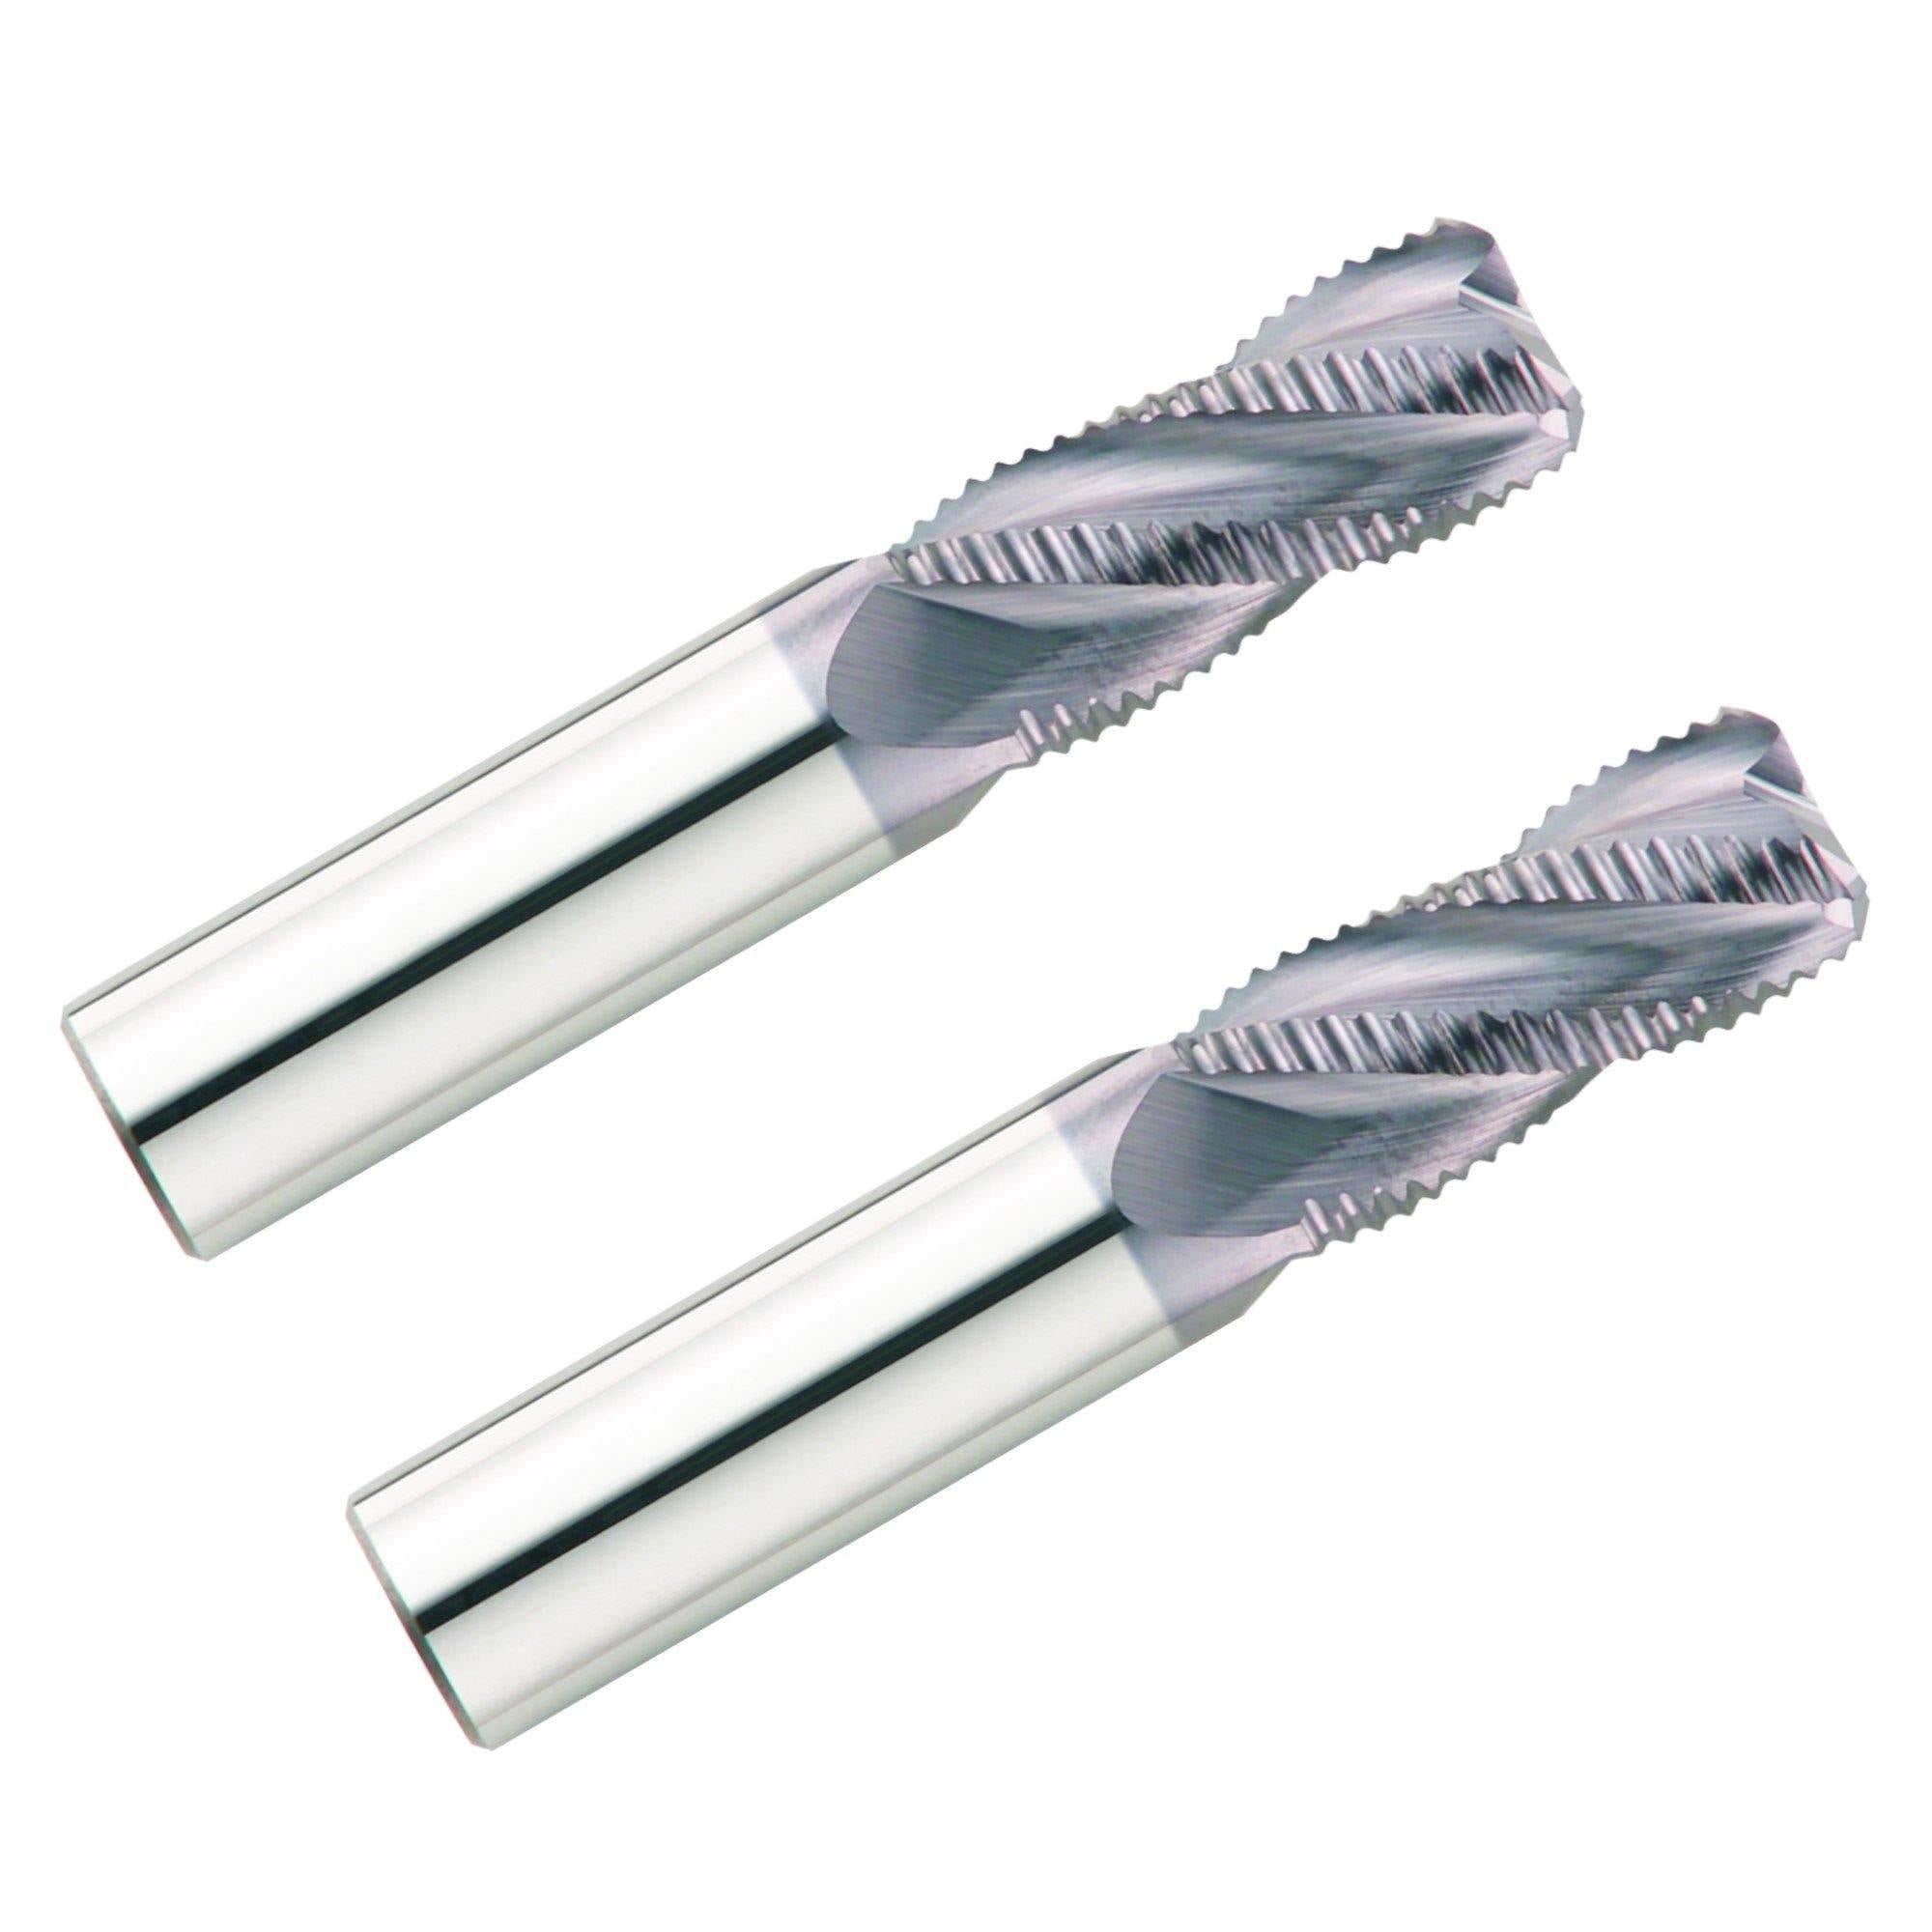 (2 Pack) 7/8" x 1-1/2" x 4" Turbo Roughing Carbide End Mills - The End Mill Store 